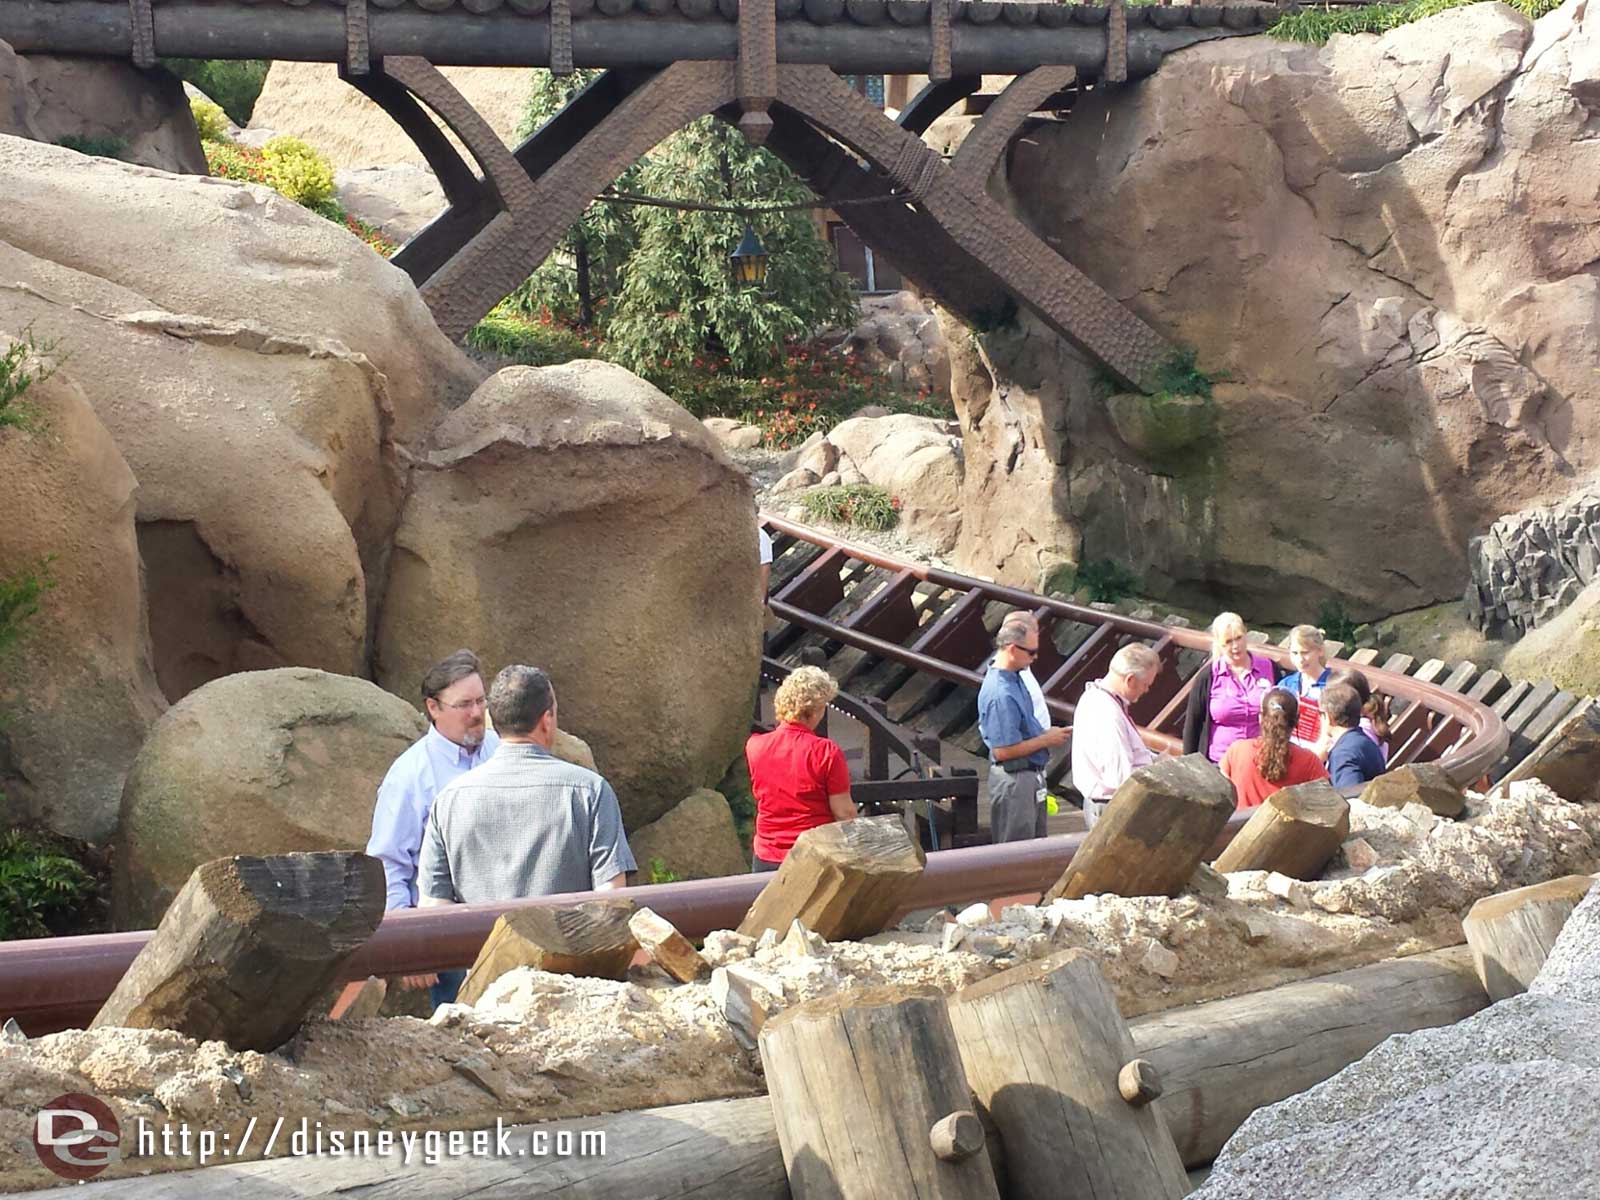 Looked to be a tour/inspection/punch list meeting going on with a large group of CMs, Imagineers and workers walking the track of the Seven Dwarfs Mine Train